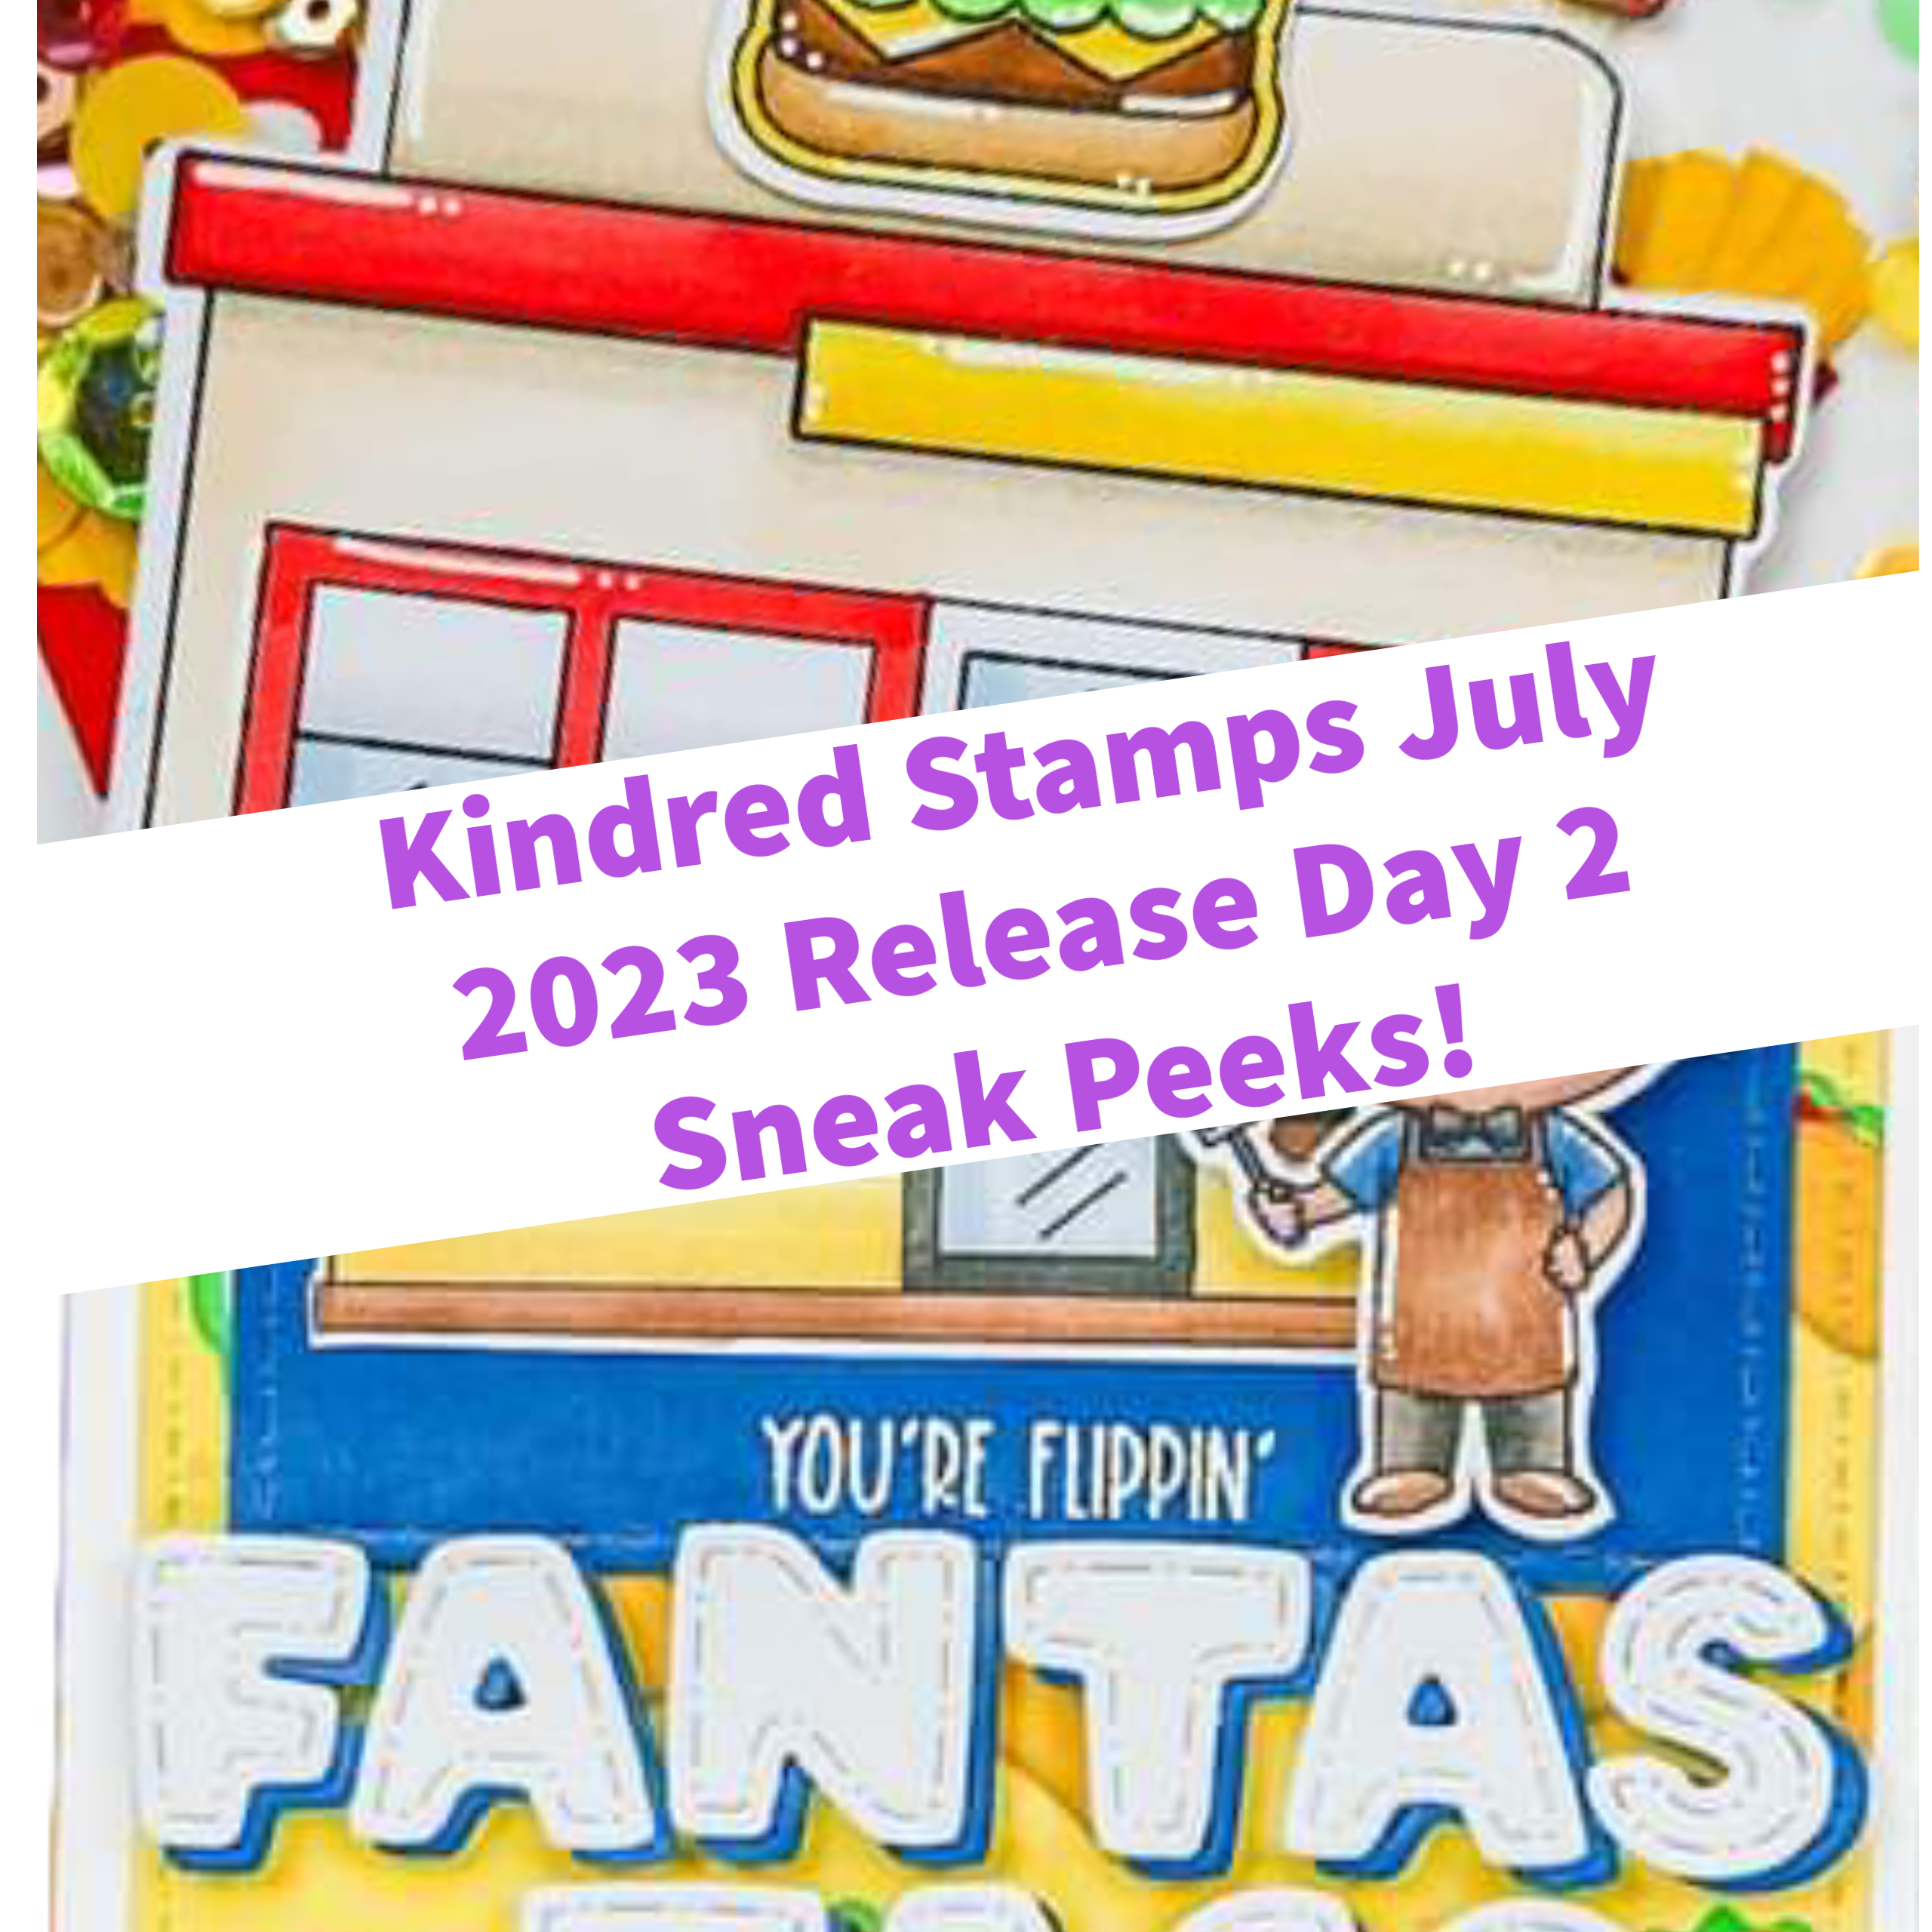 July Release Day 2 - Kindred Town Fast Food